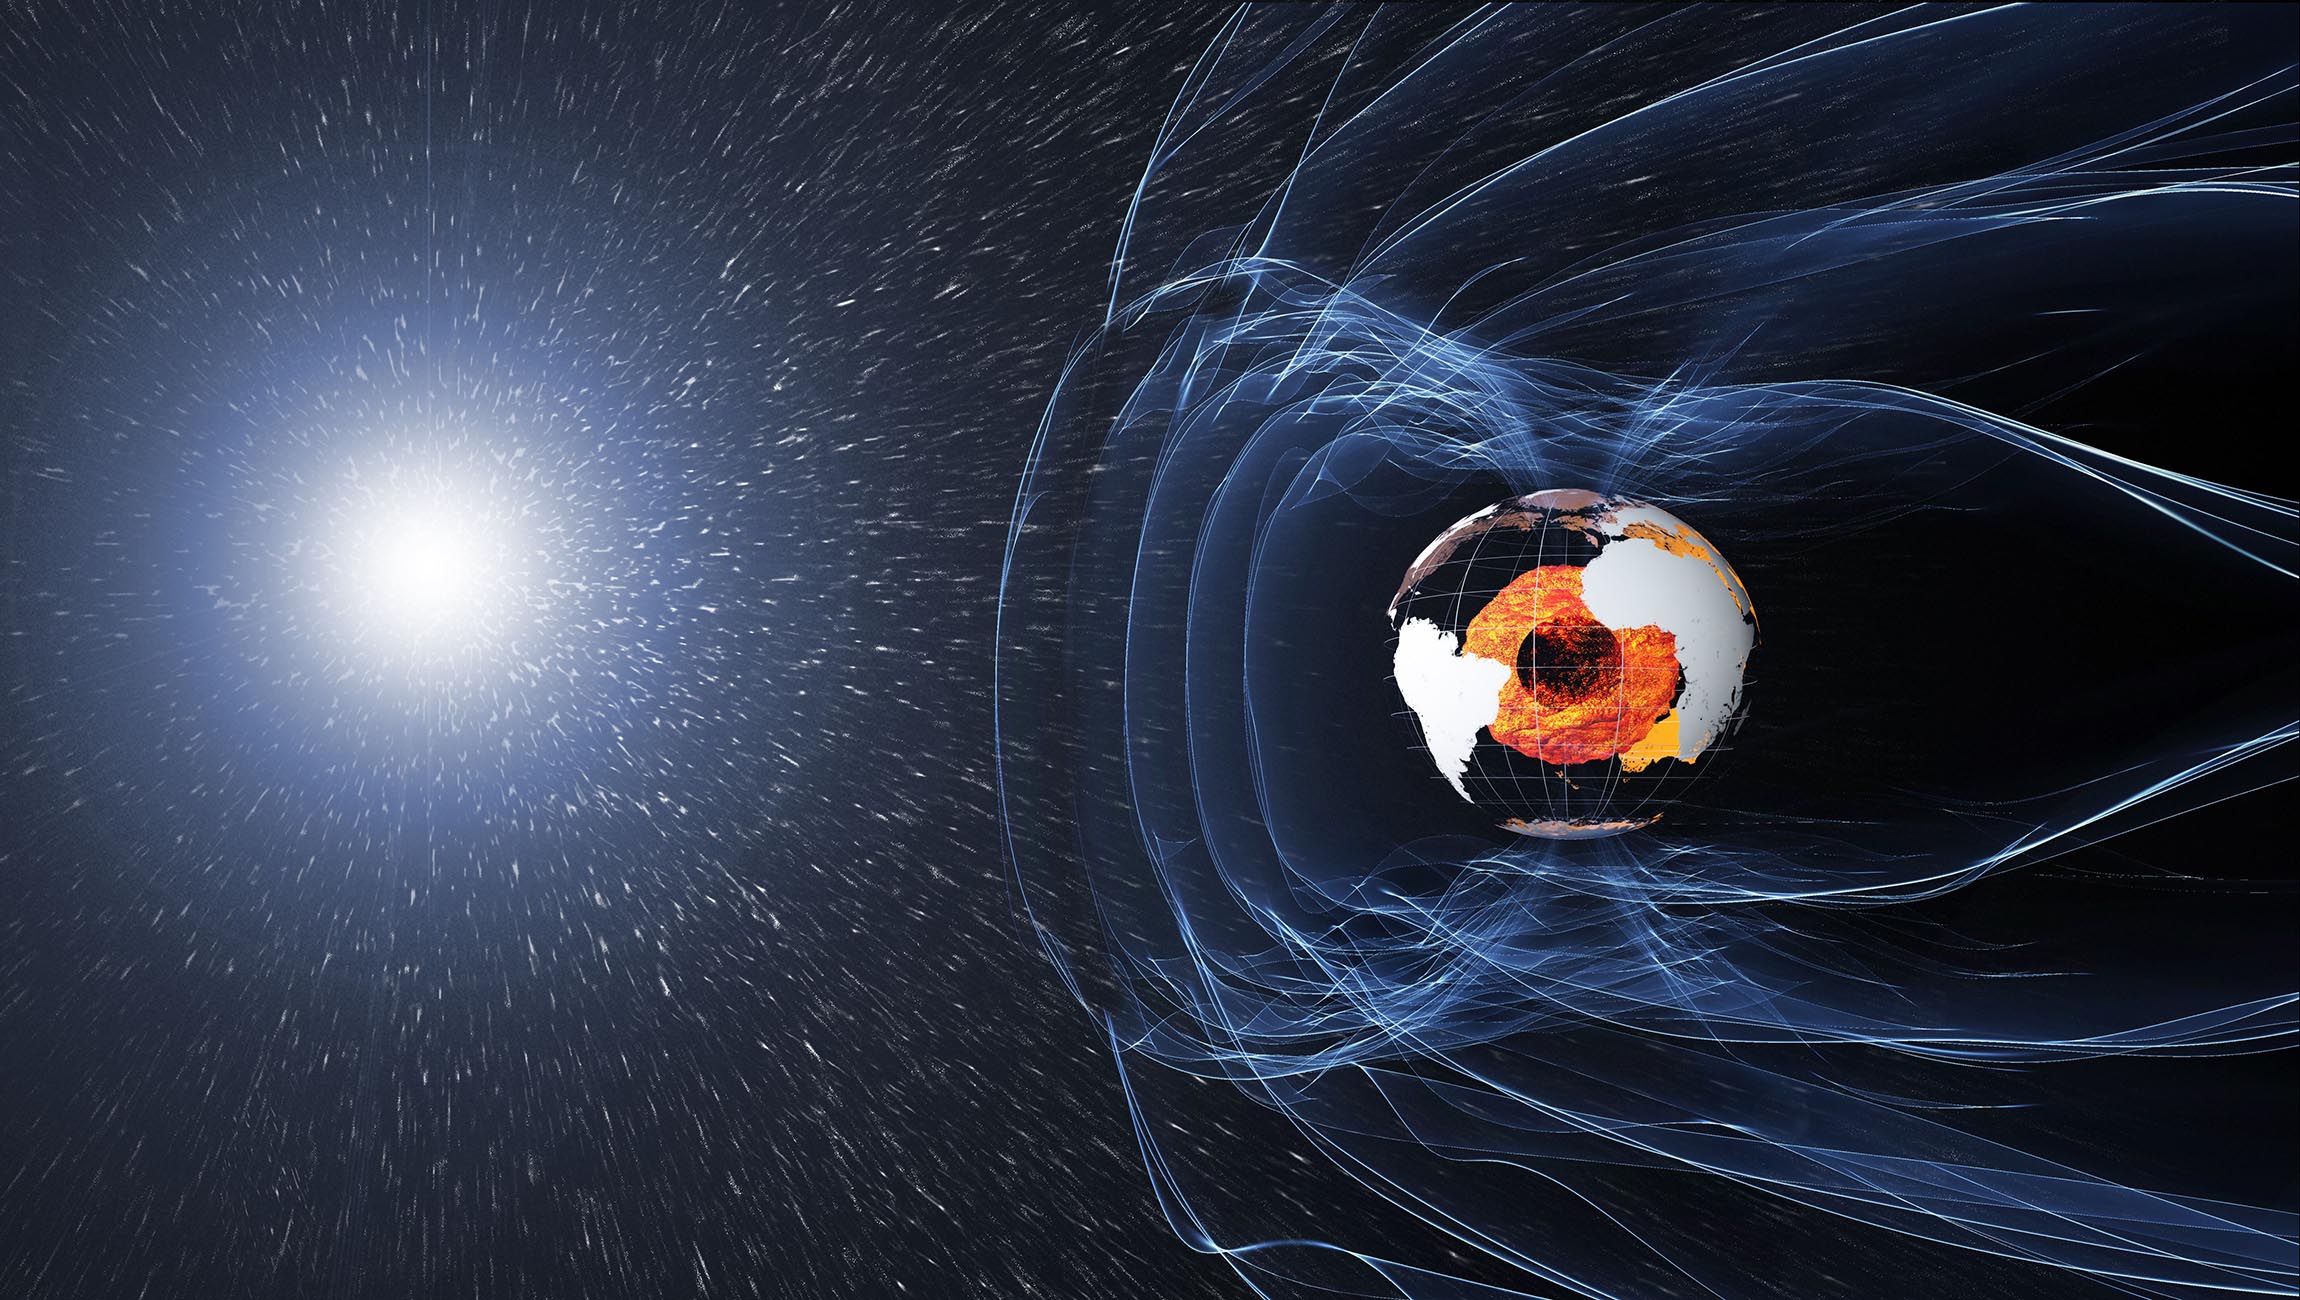 The magnetic field protecting our planet originates deep in the Earth's core but fluctuates in strength over time.